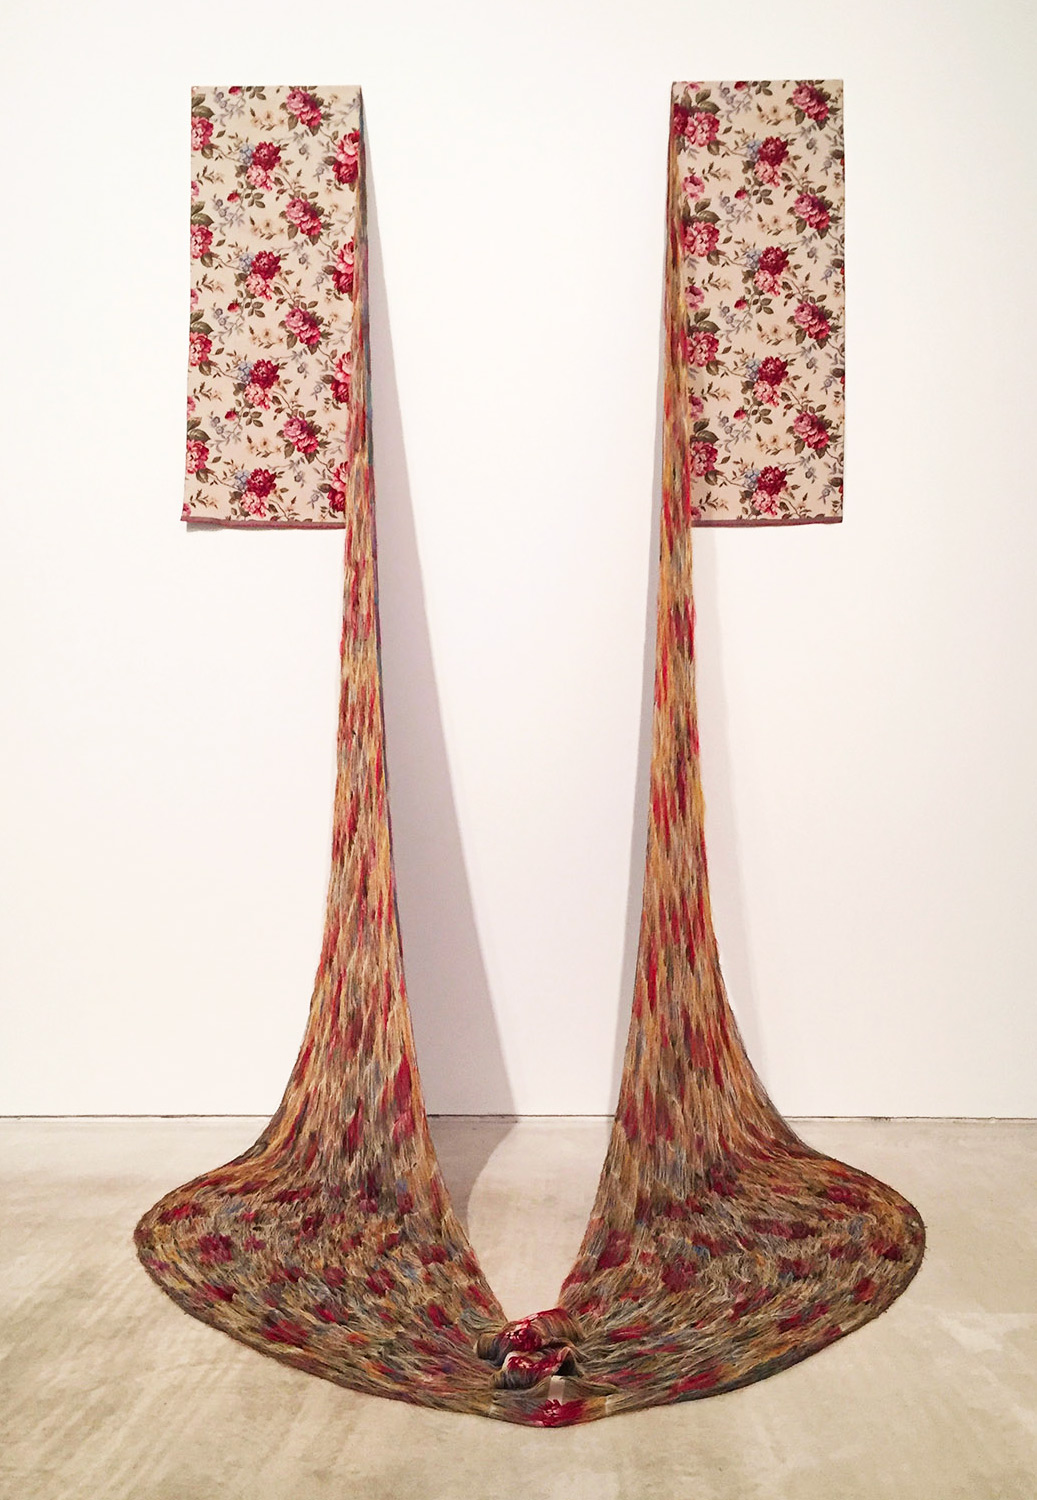 Traditional Textiles are Unraveled and Re-Woven in Installations by Aiko Tezuka